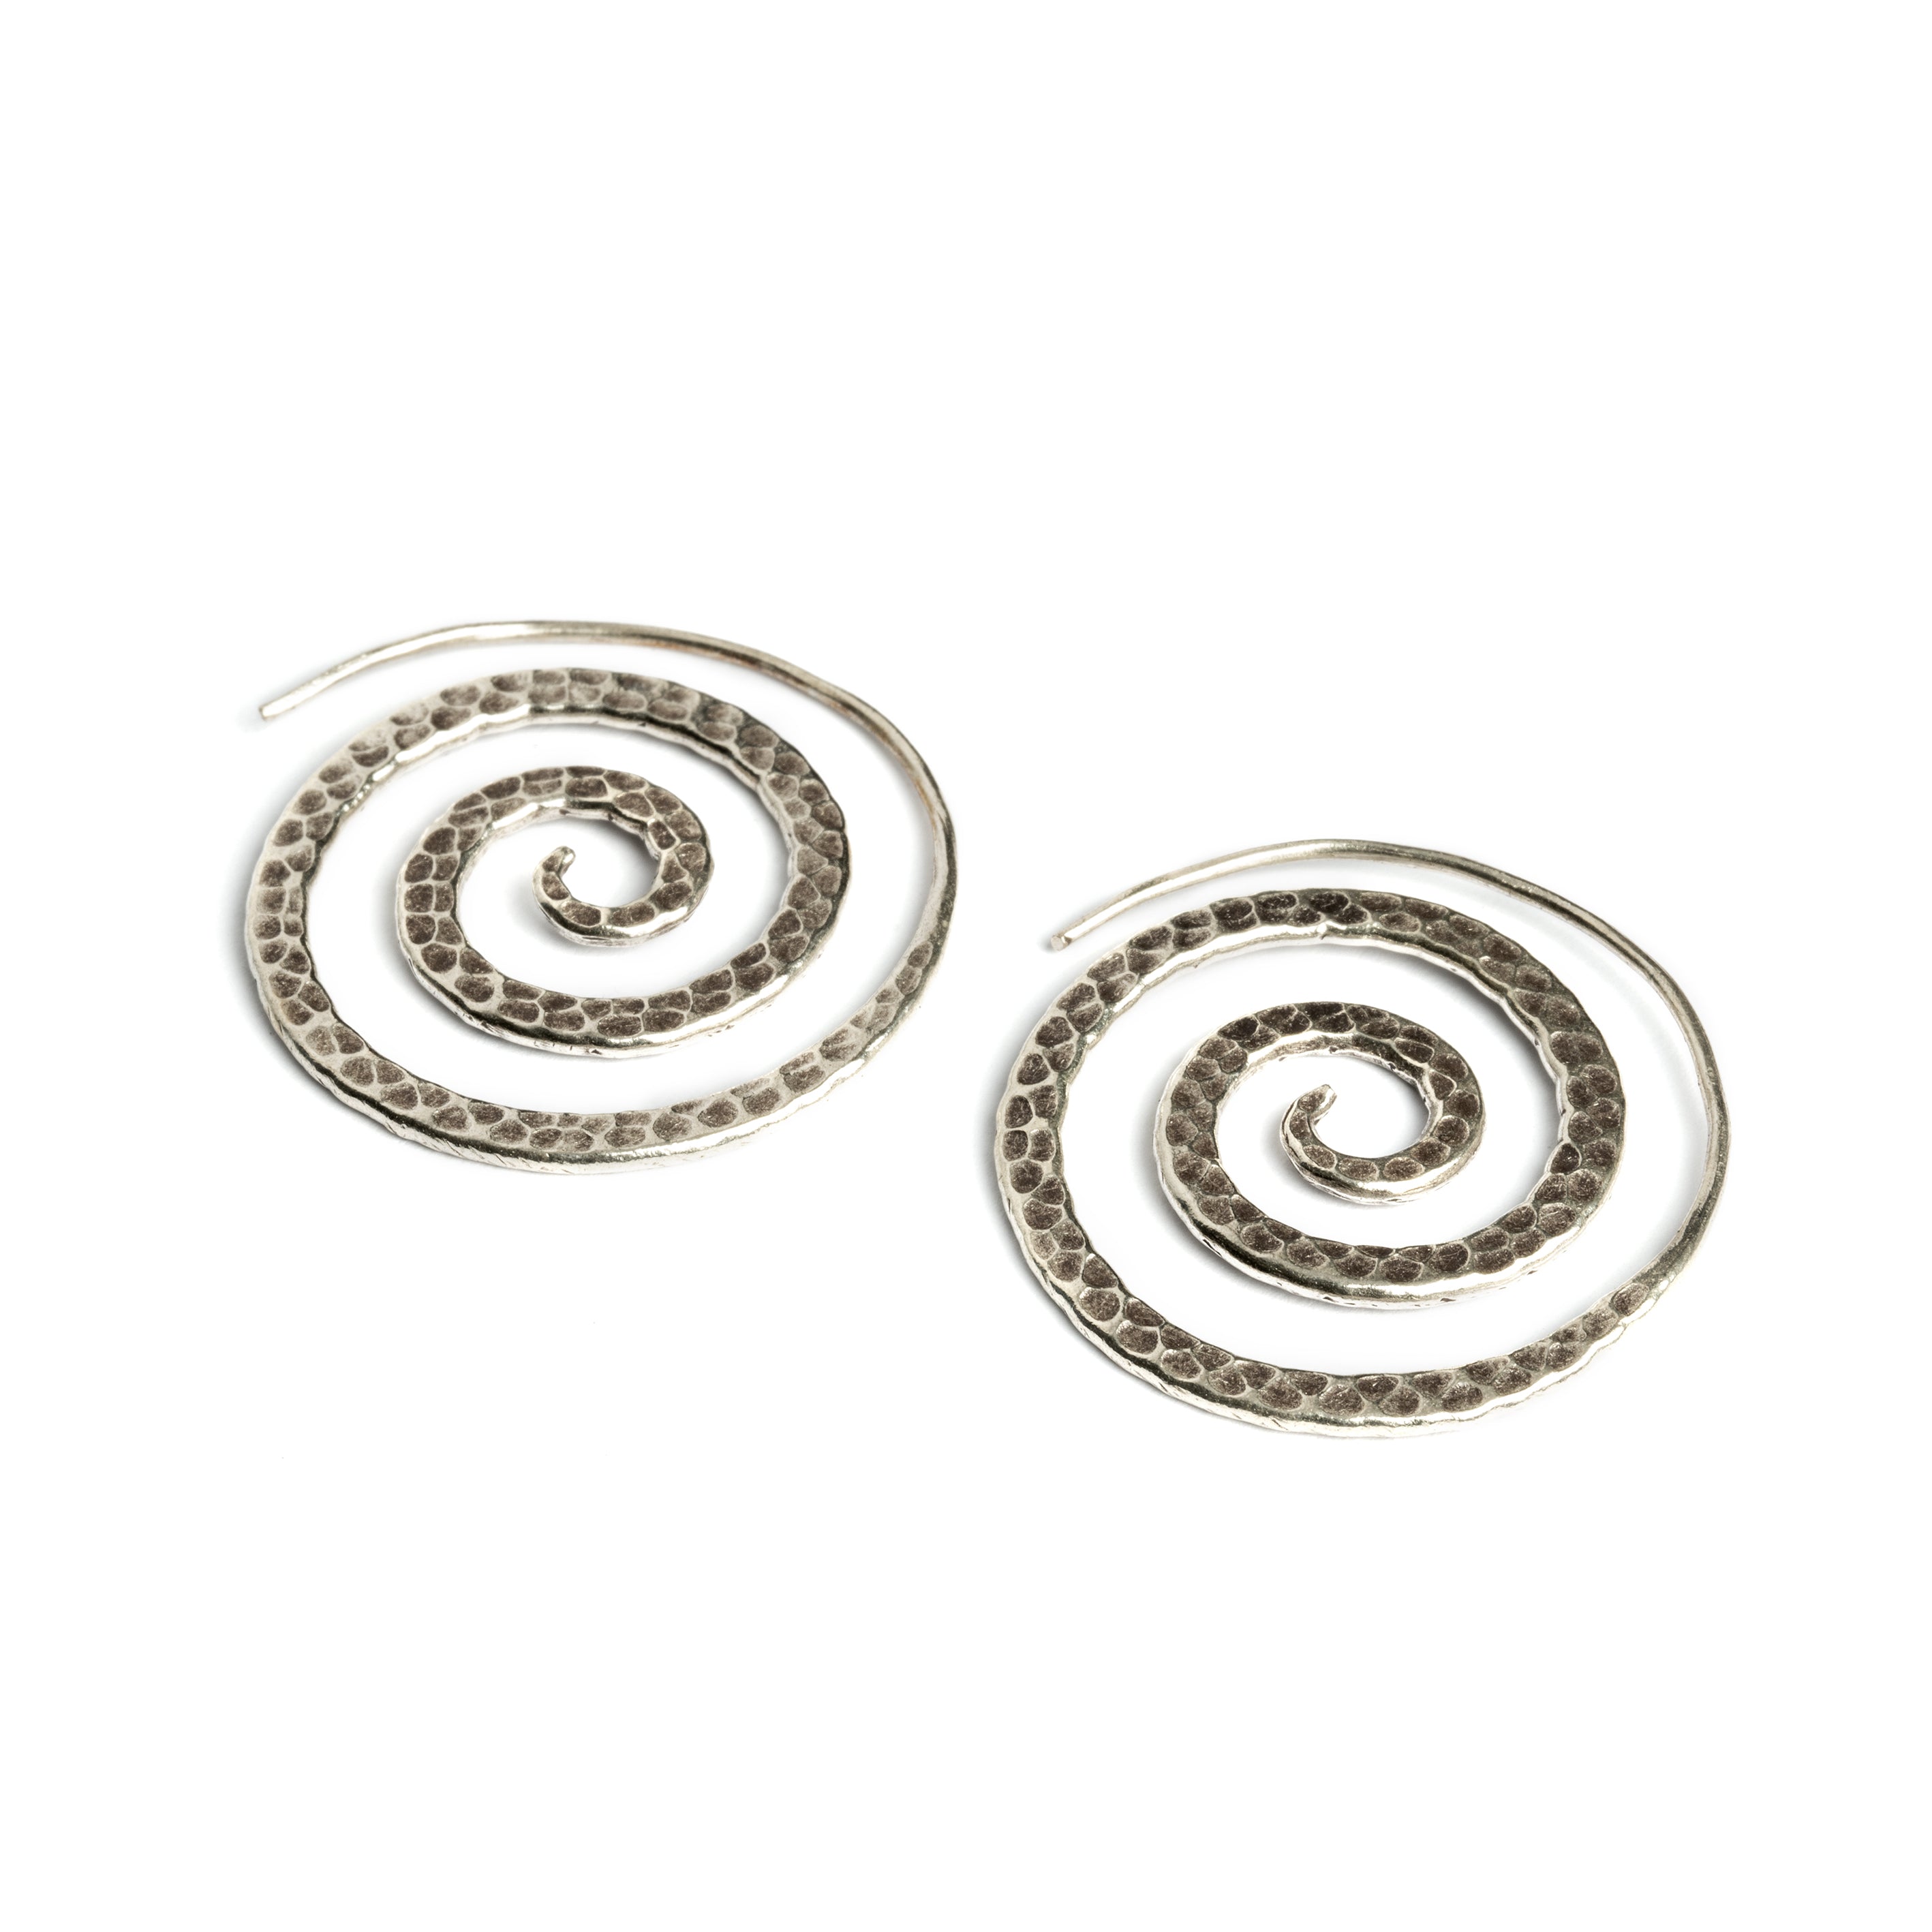 Hammered Spiral Tribal Silver Earrings side view